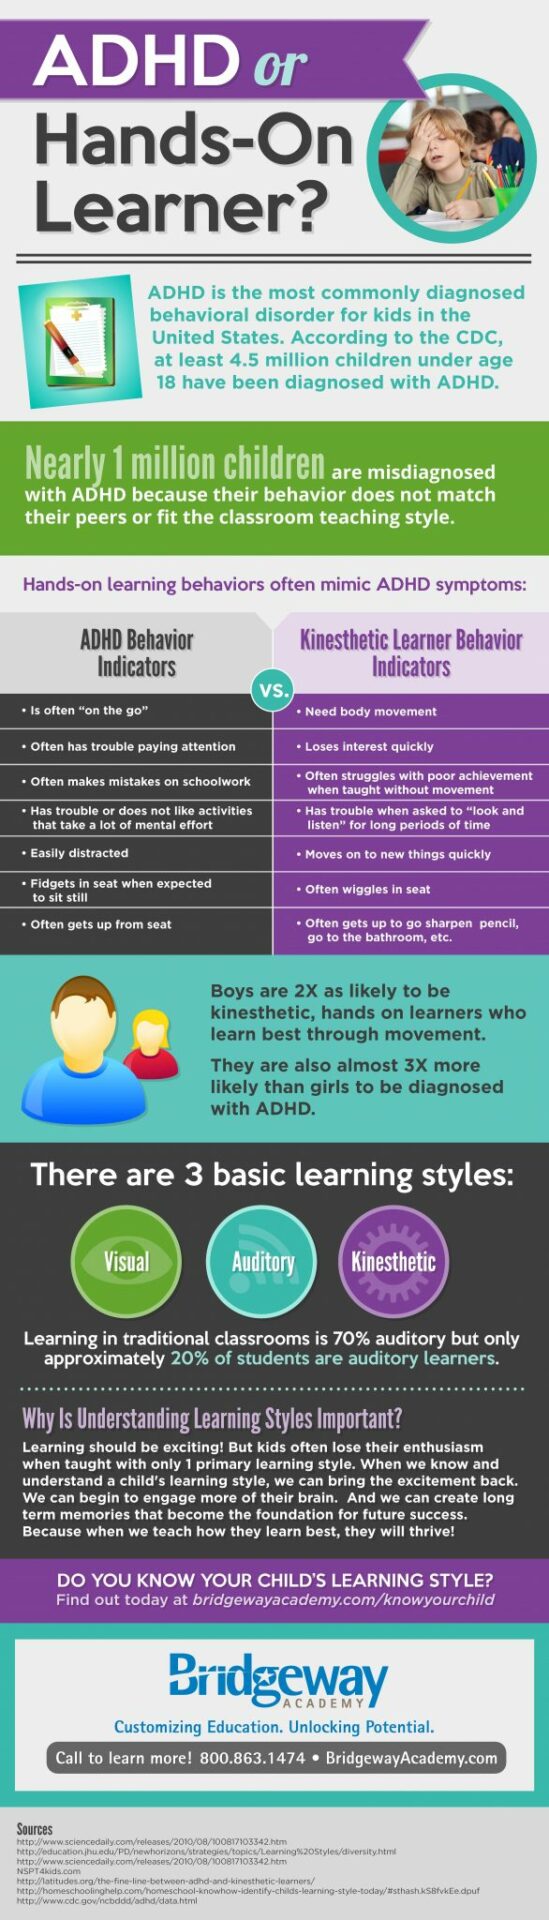 Does my child have ADHD, Does My Child have ADHD or are They a Kinesthetic Learner?